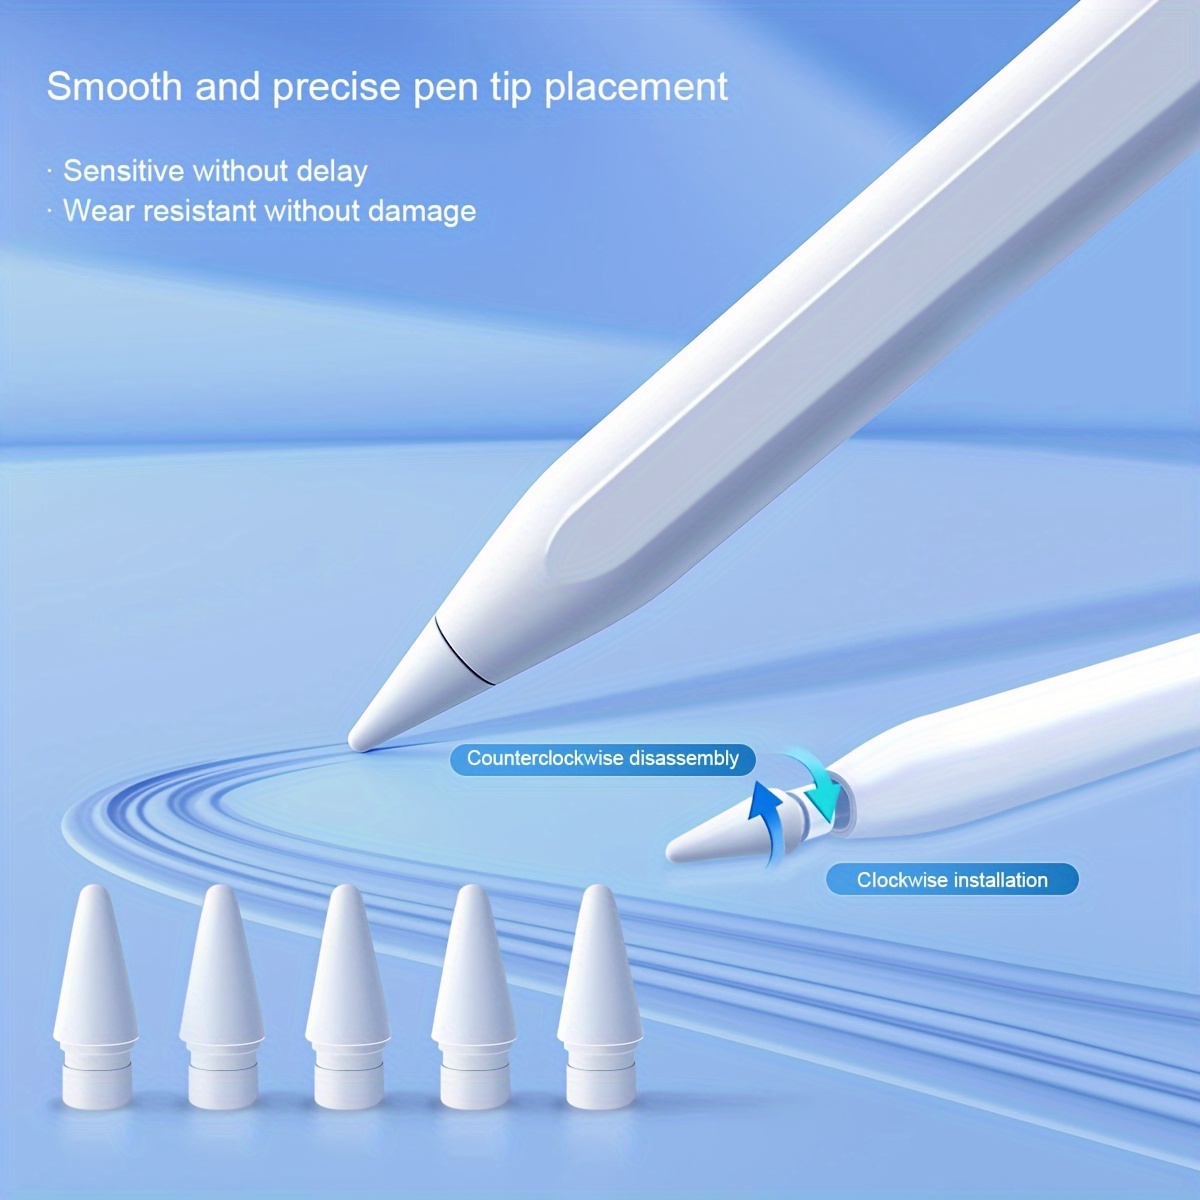 

Pencil Pen Tips - Compatible With 1st And 2nd Generation - Active Replacement - Set Of 5 - No Battery Or Electronic Parts